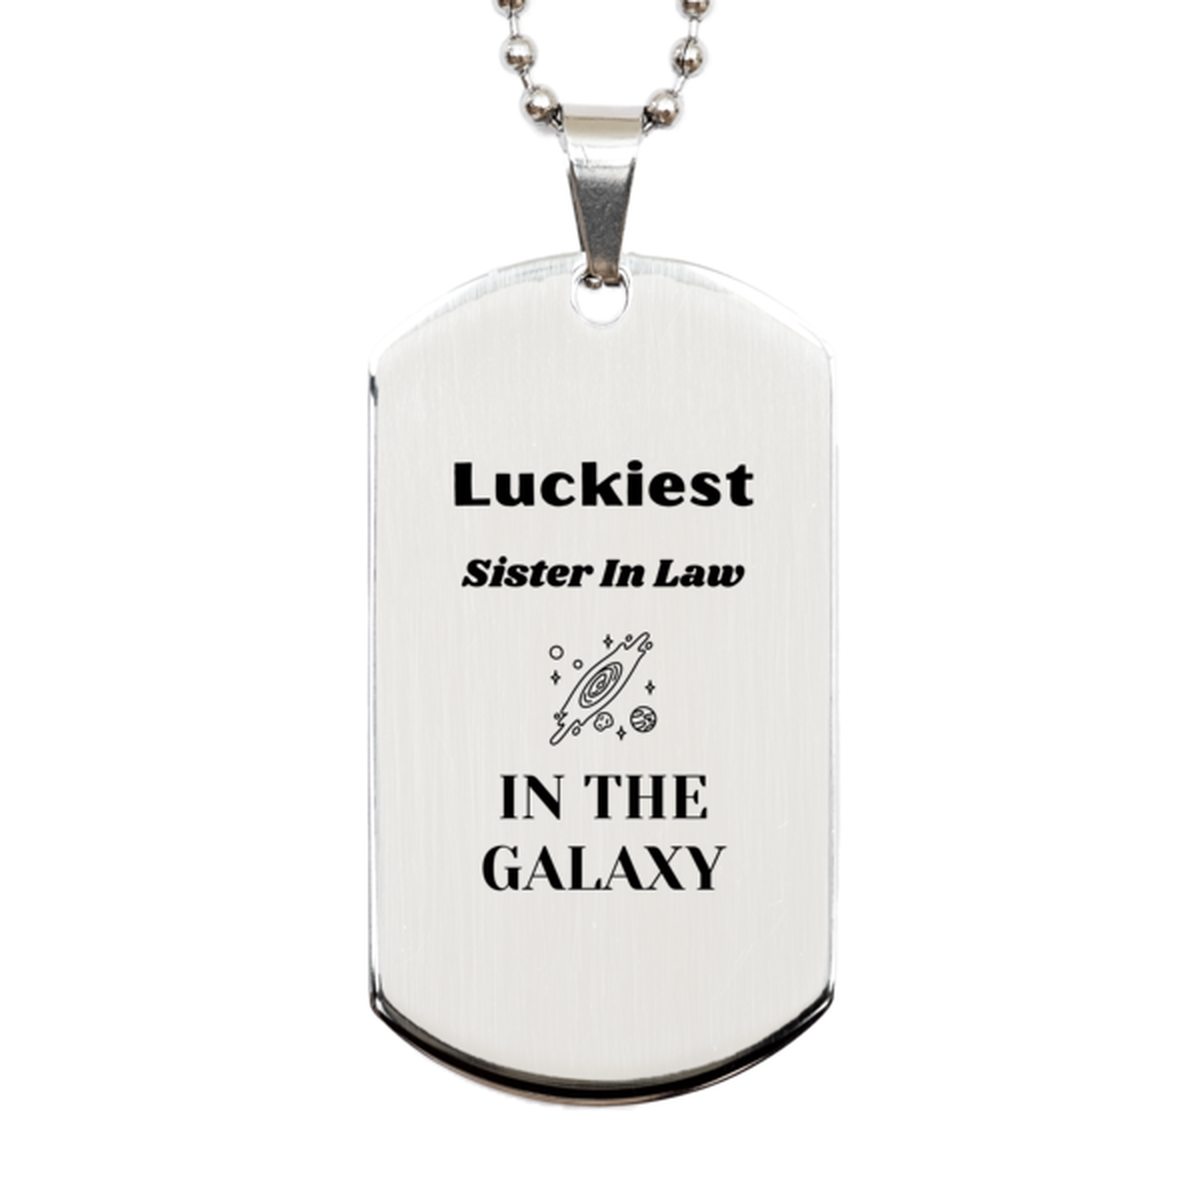 Luckiest Sister In Law in the Galaxy, To My Sister In Law Engraved Gifts, Christmas Sister In Law Silver Dog Tag Gifts, X-mas Birthday Unique Gifts For Sister In Law Men Women